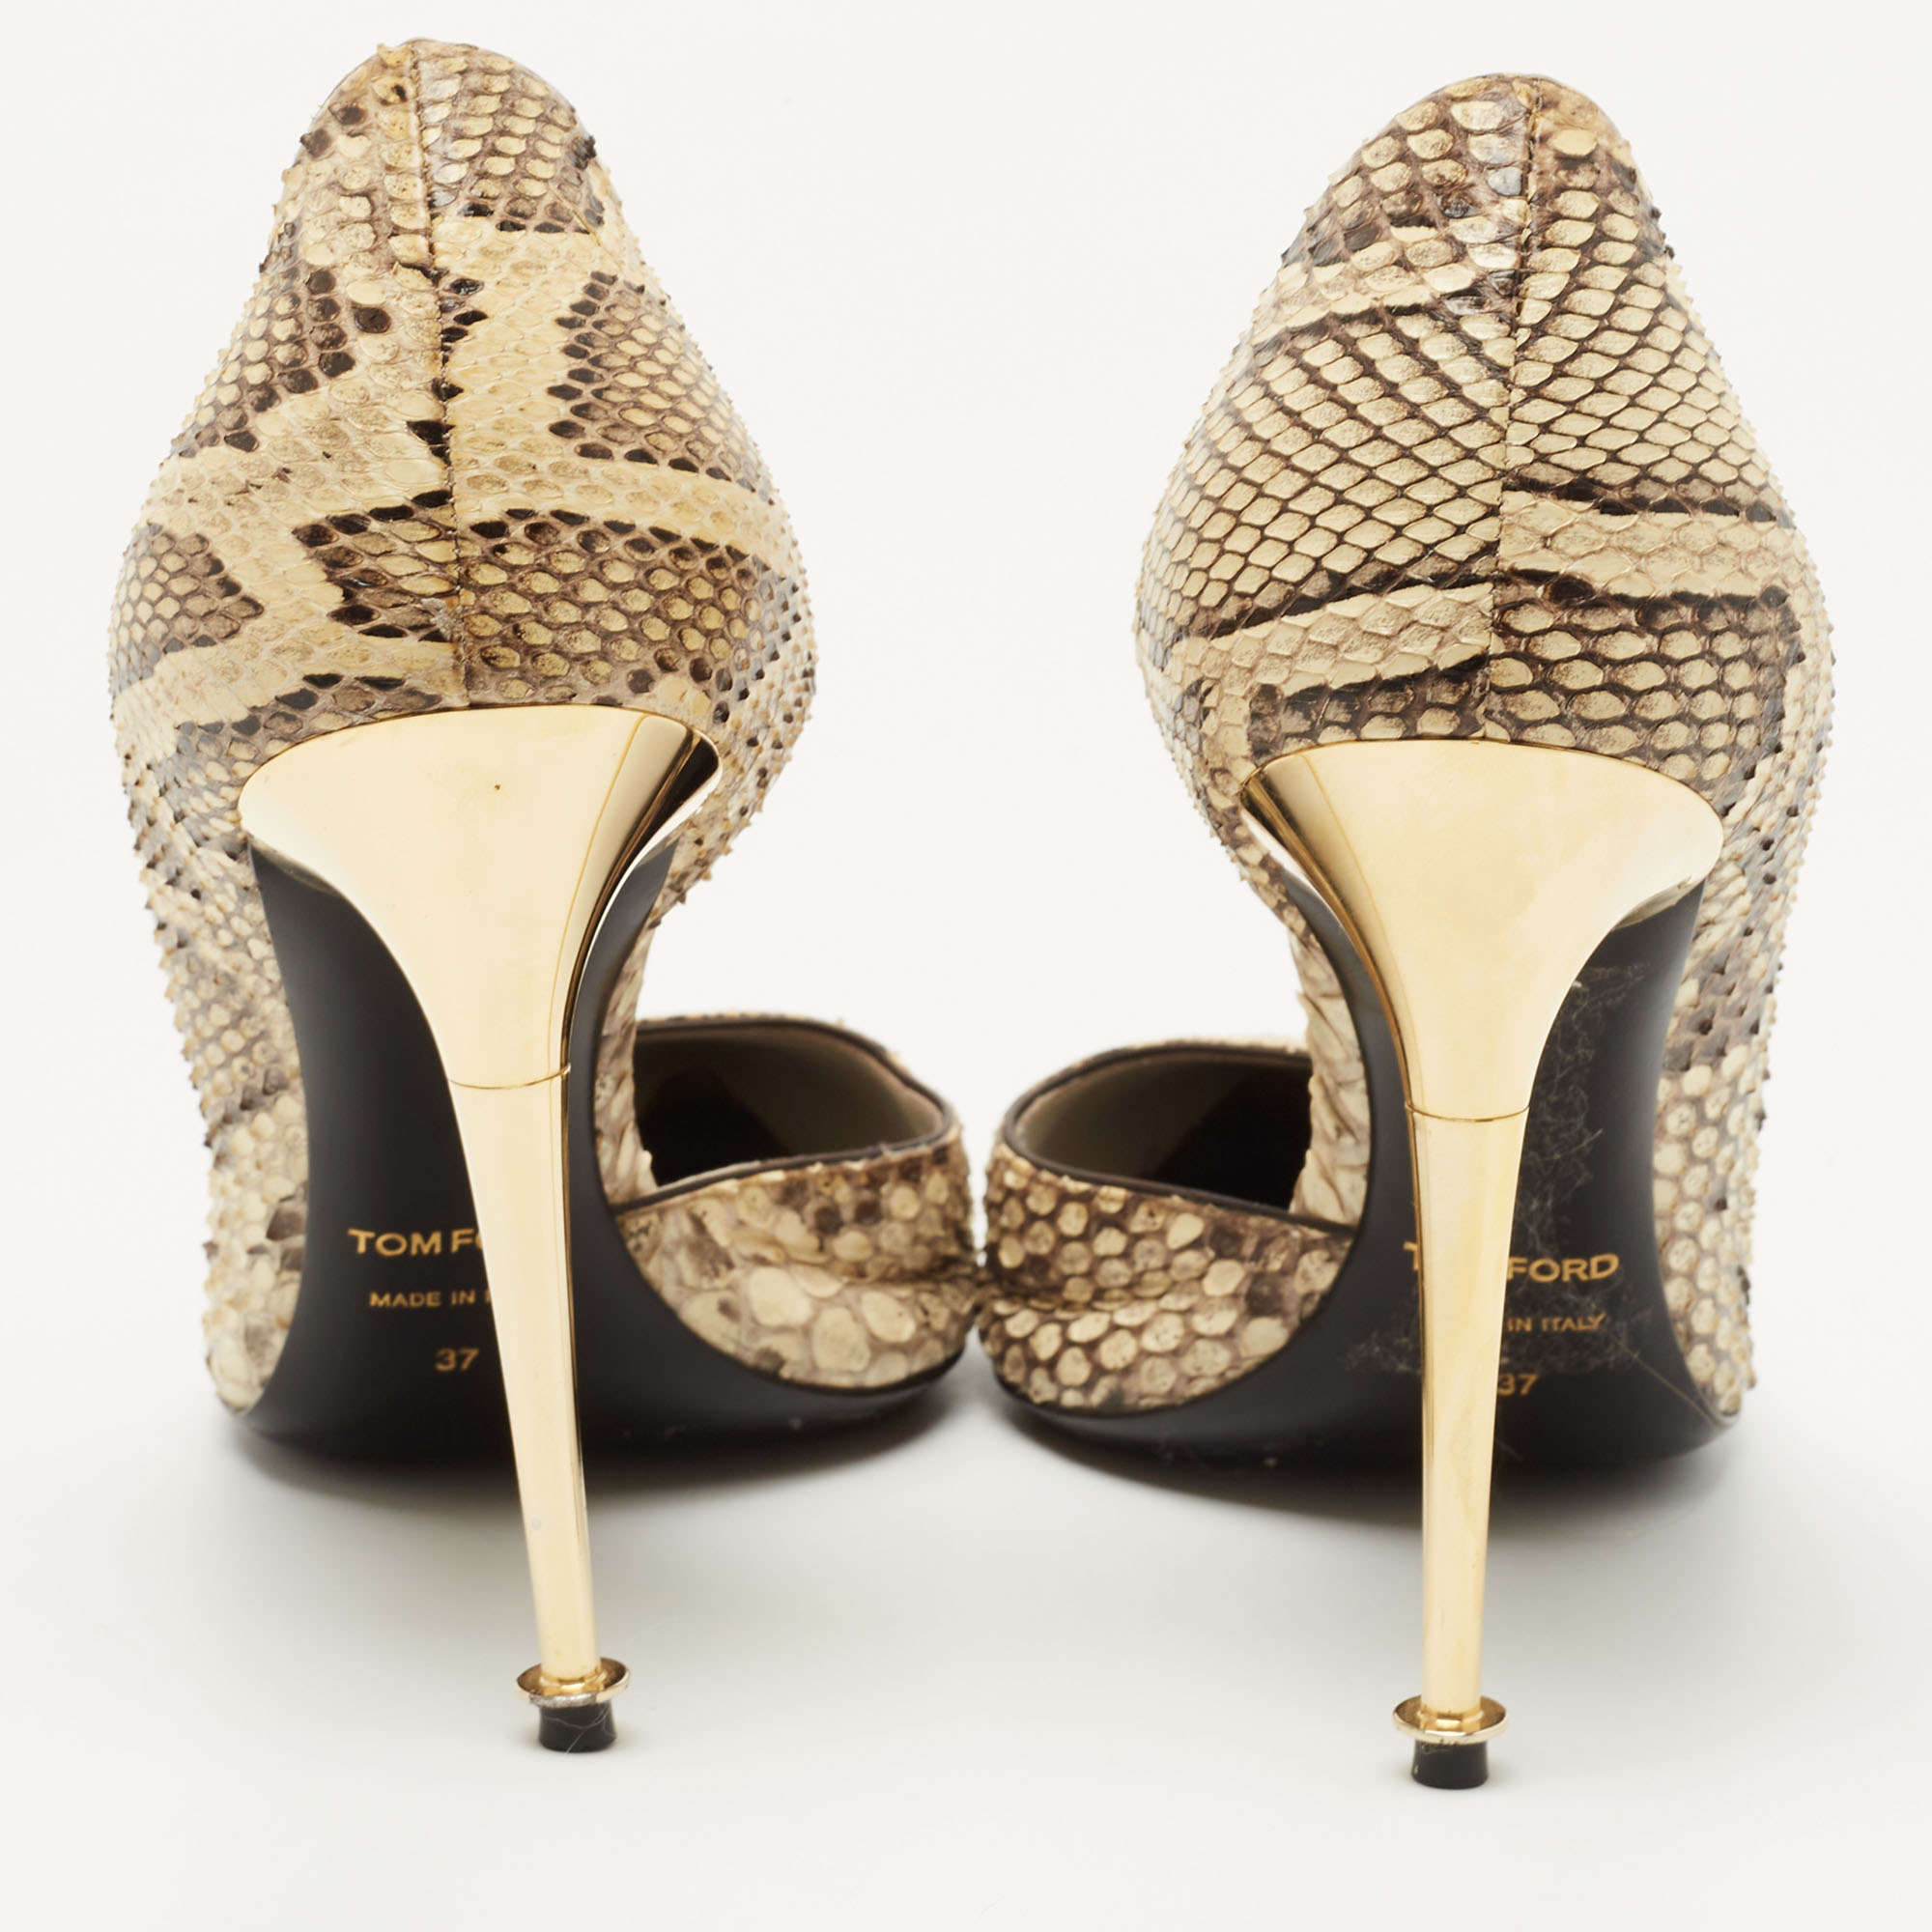 Tom Ford Beige/Brown Python Leather D'orsay Pointed Toe Pumps Size 37